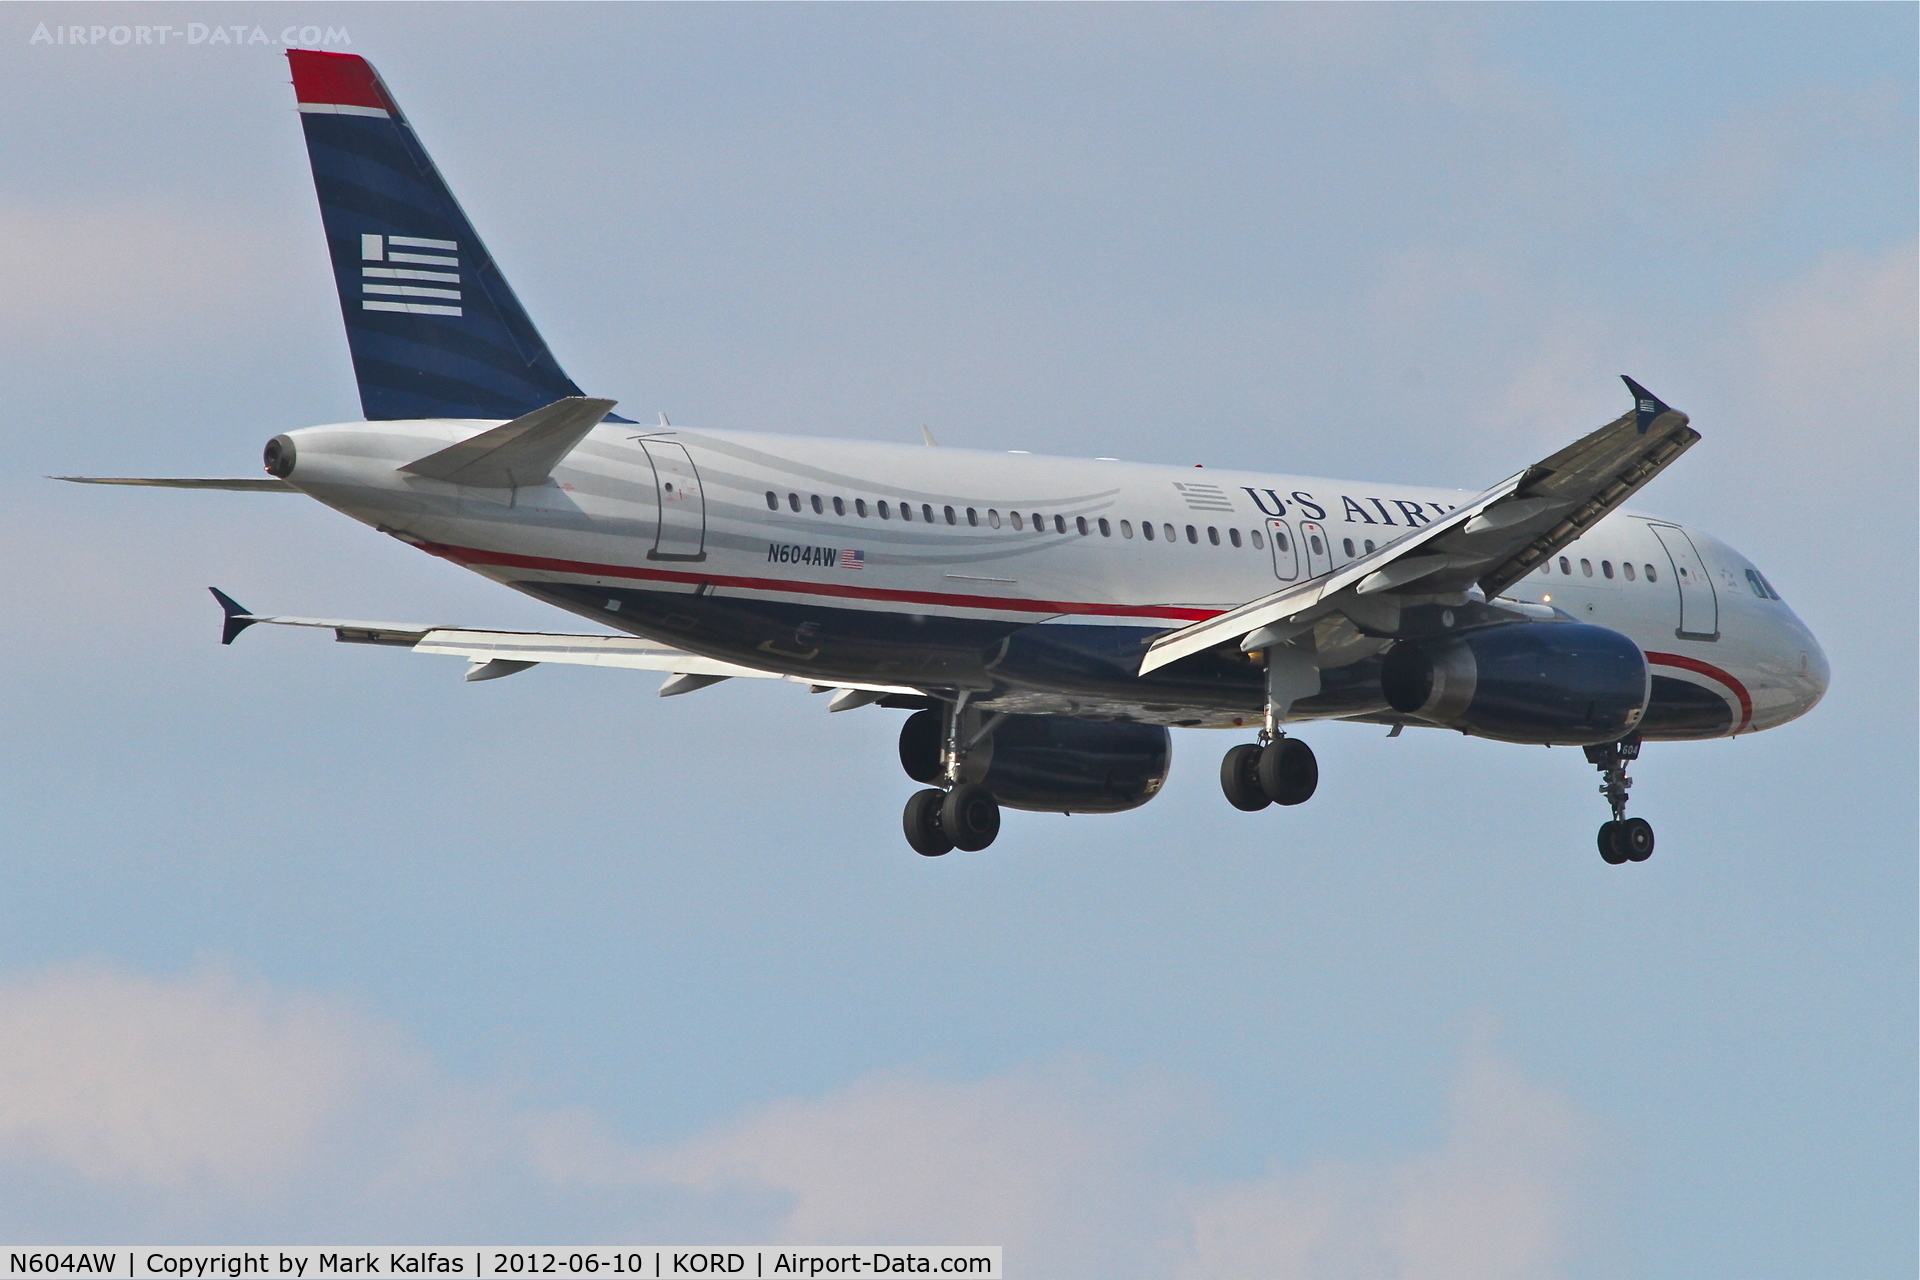 N604AW, 2000 Airbus A320-232 C/N 1196, US Airways Airbus A320-232, AWE 5 arriving from Phoenix/KPHX, RWY 10 approach KORD.